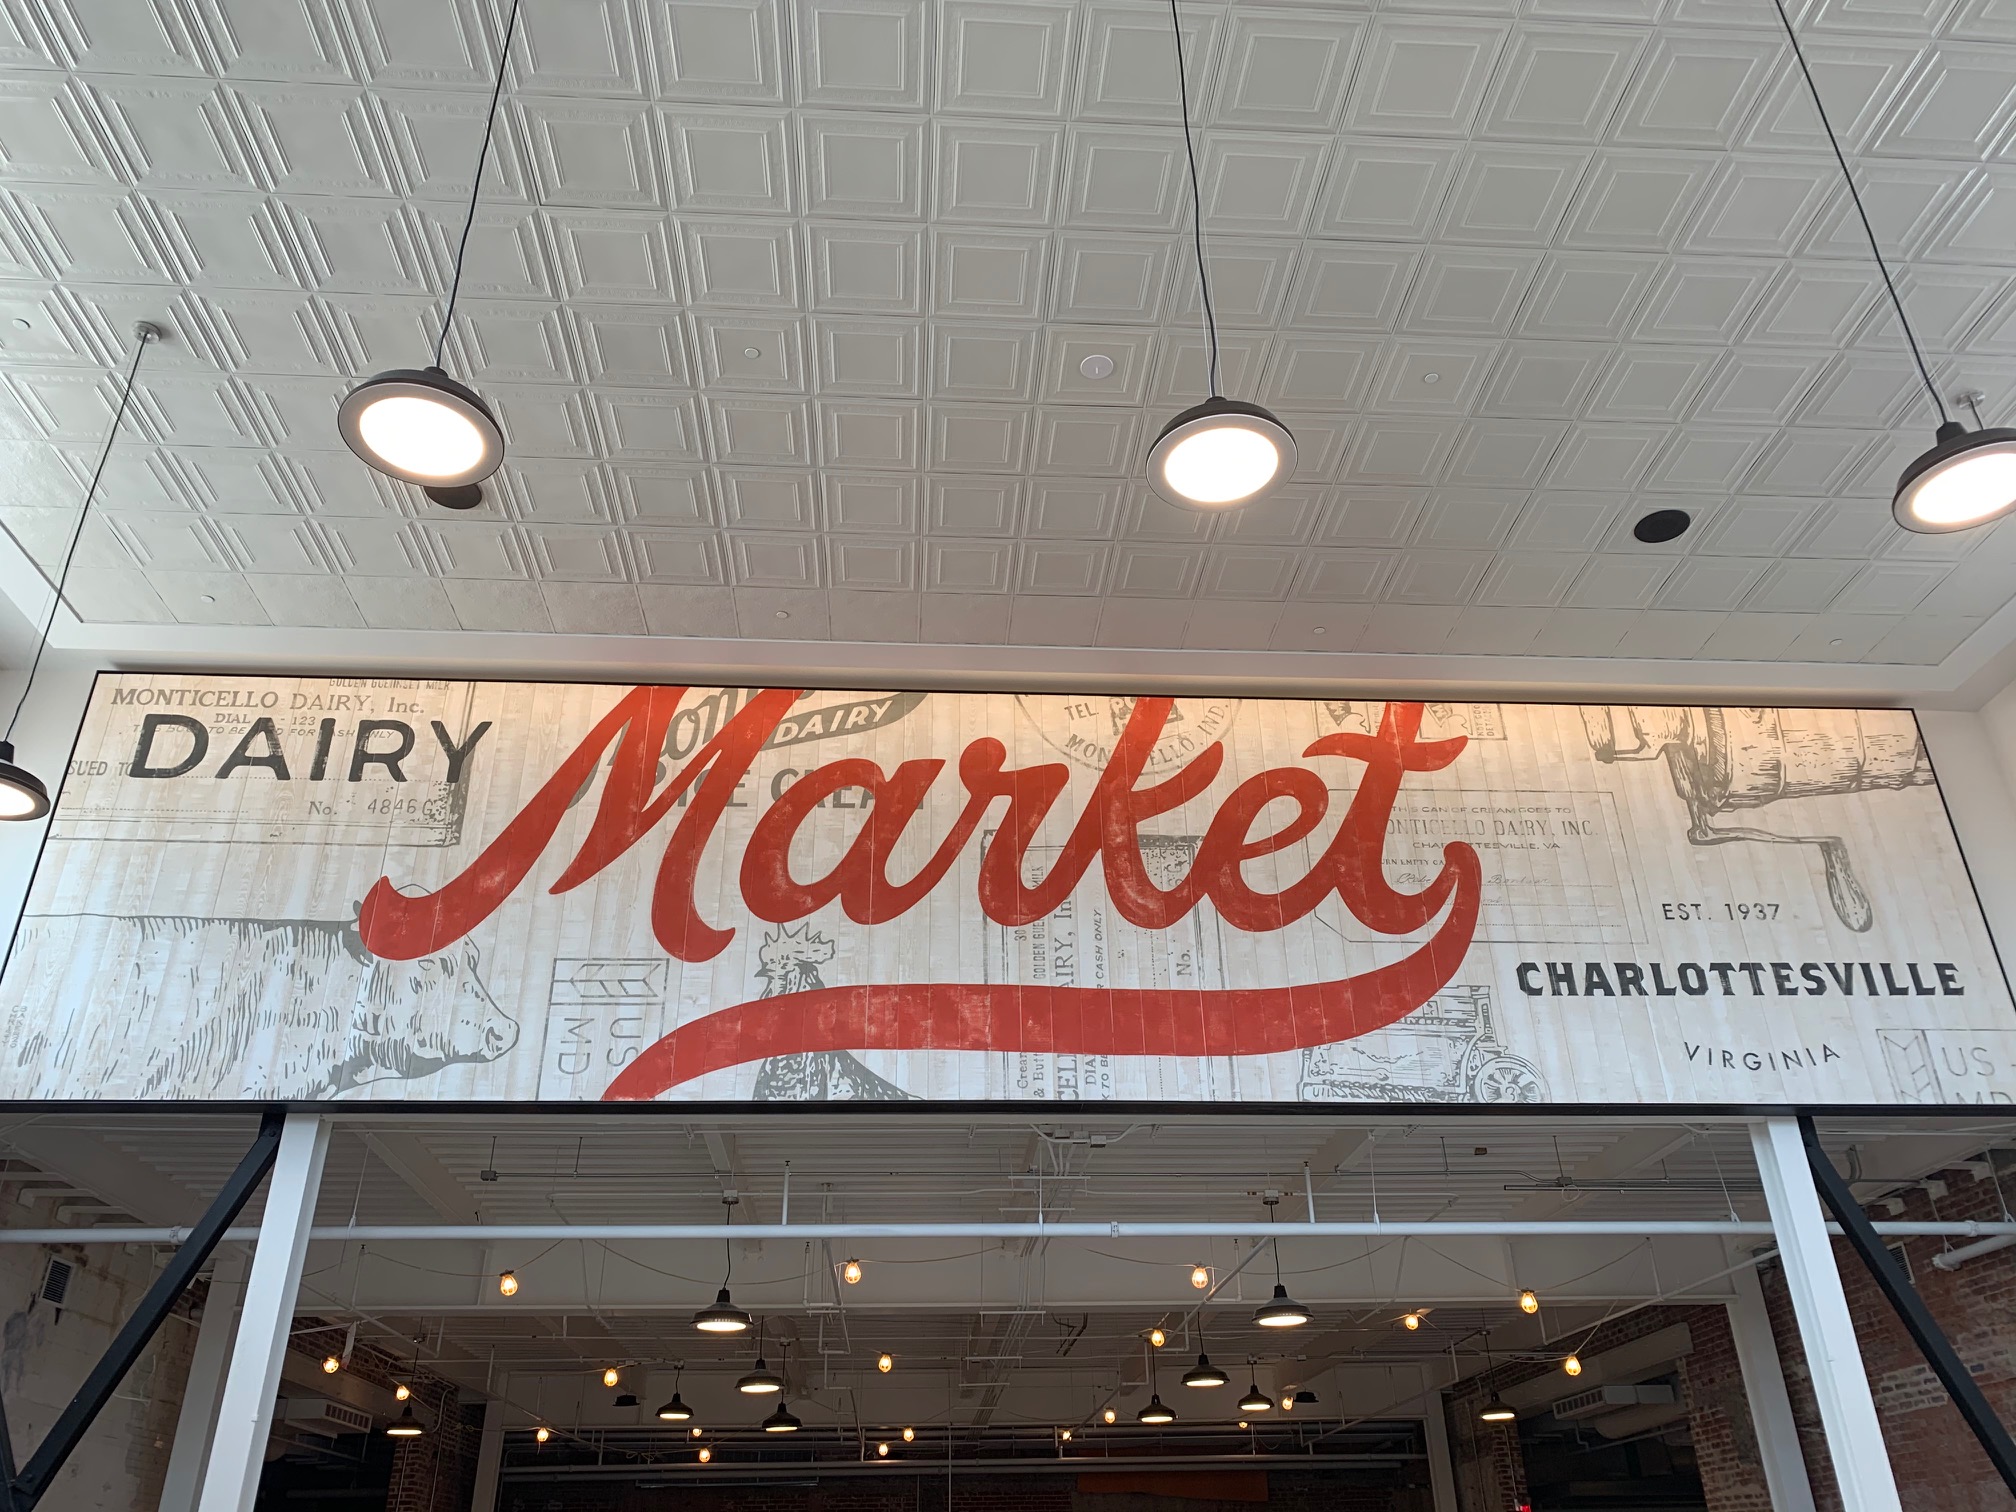 Entrance Sign to Dairy Market - says "Dairy Market"